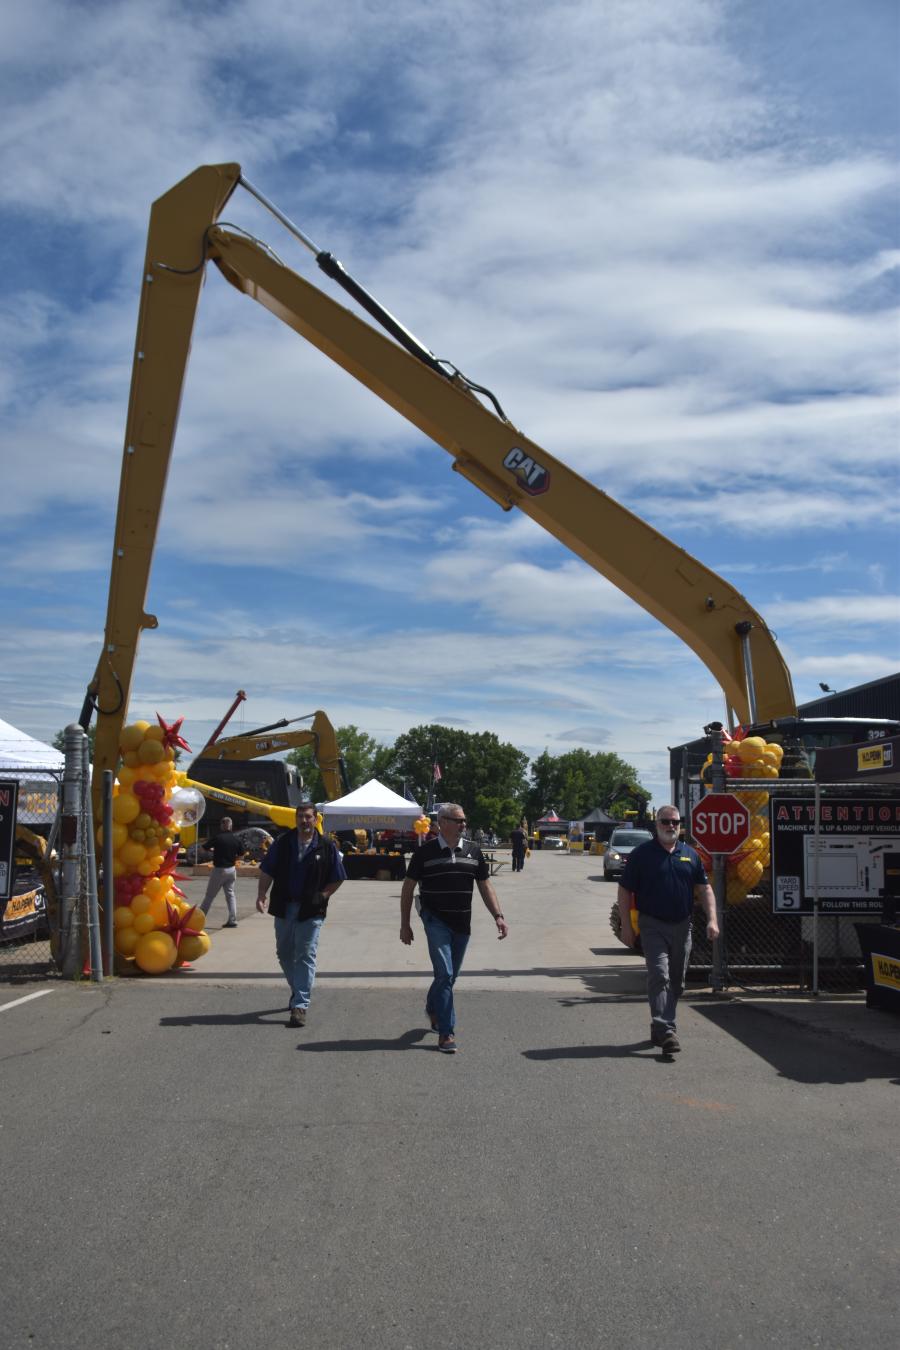 A Caterpillar long-reach excavator provides the perfect welcoming arch for guests as they arrive.
(CEG photo) 